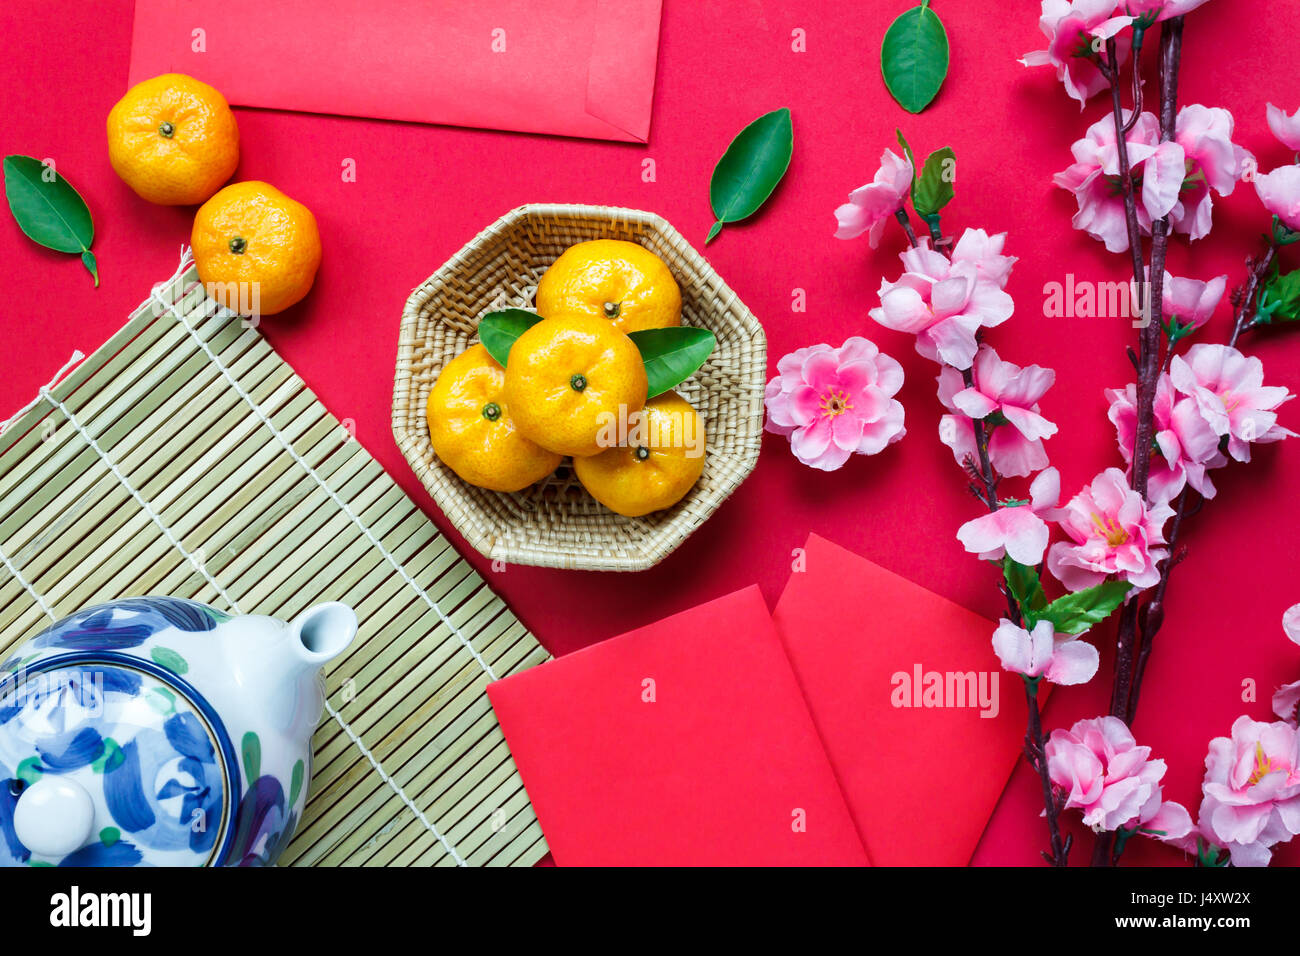 Top view accessories Chinese new year festival decorations.orange,leaf,wood basket,red packet,plum blossom,teapot on red background. Stock Photo